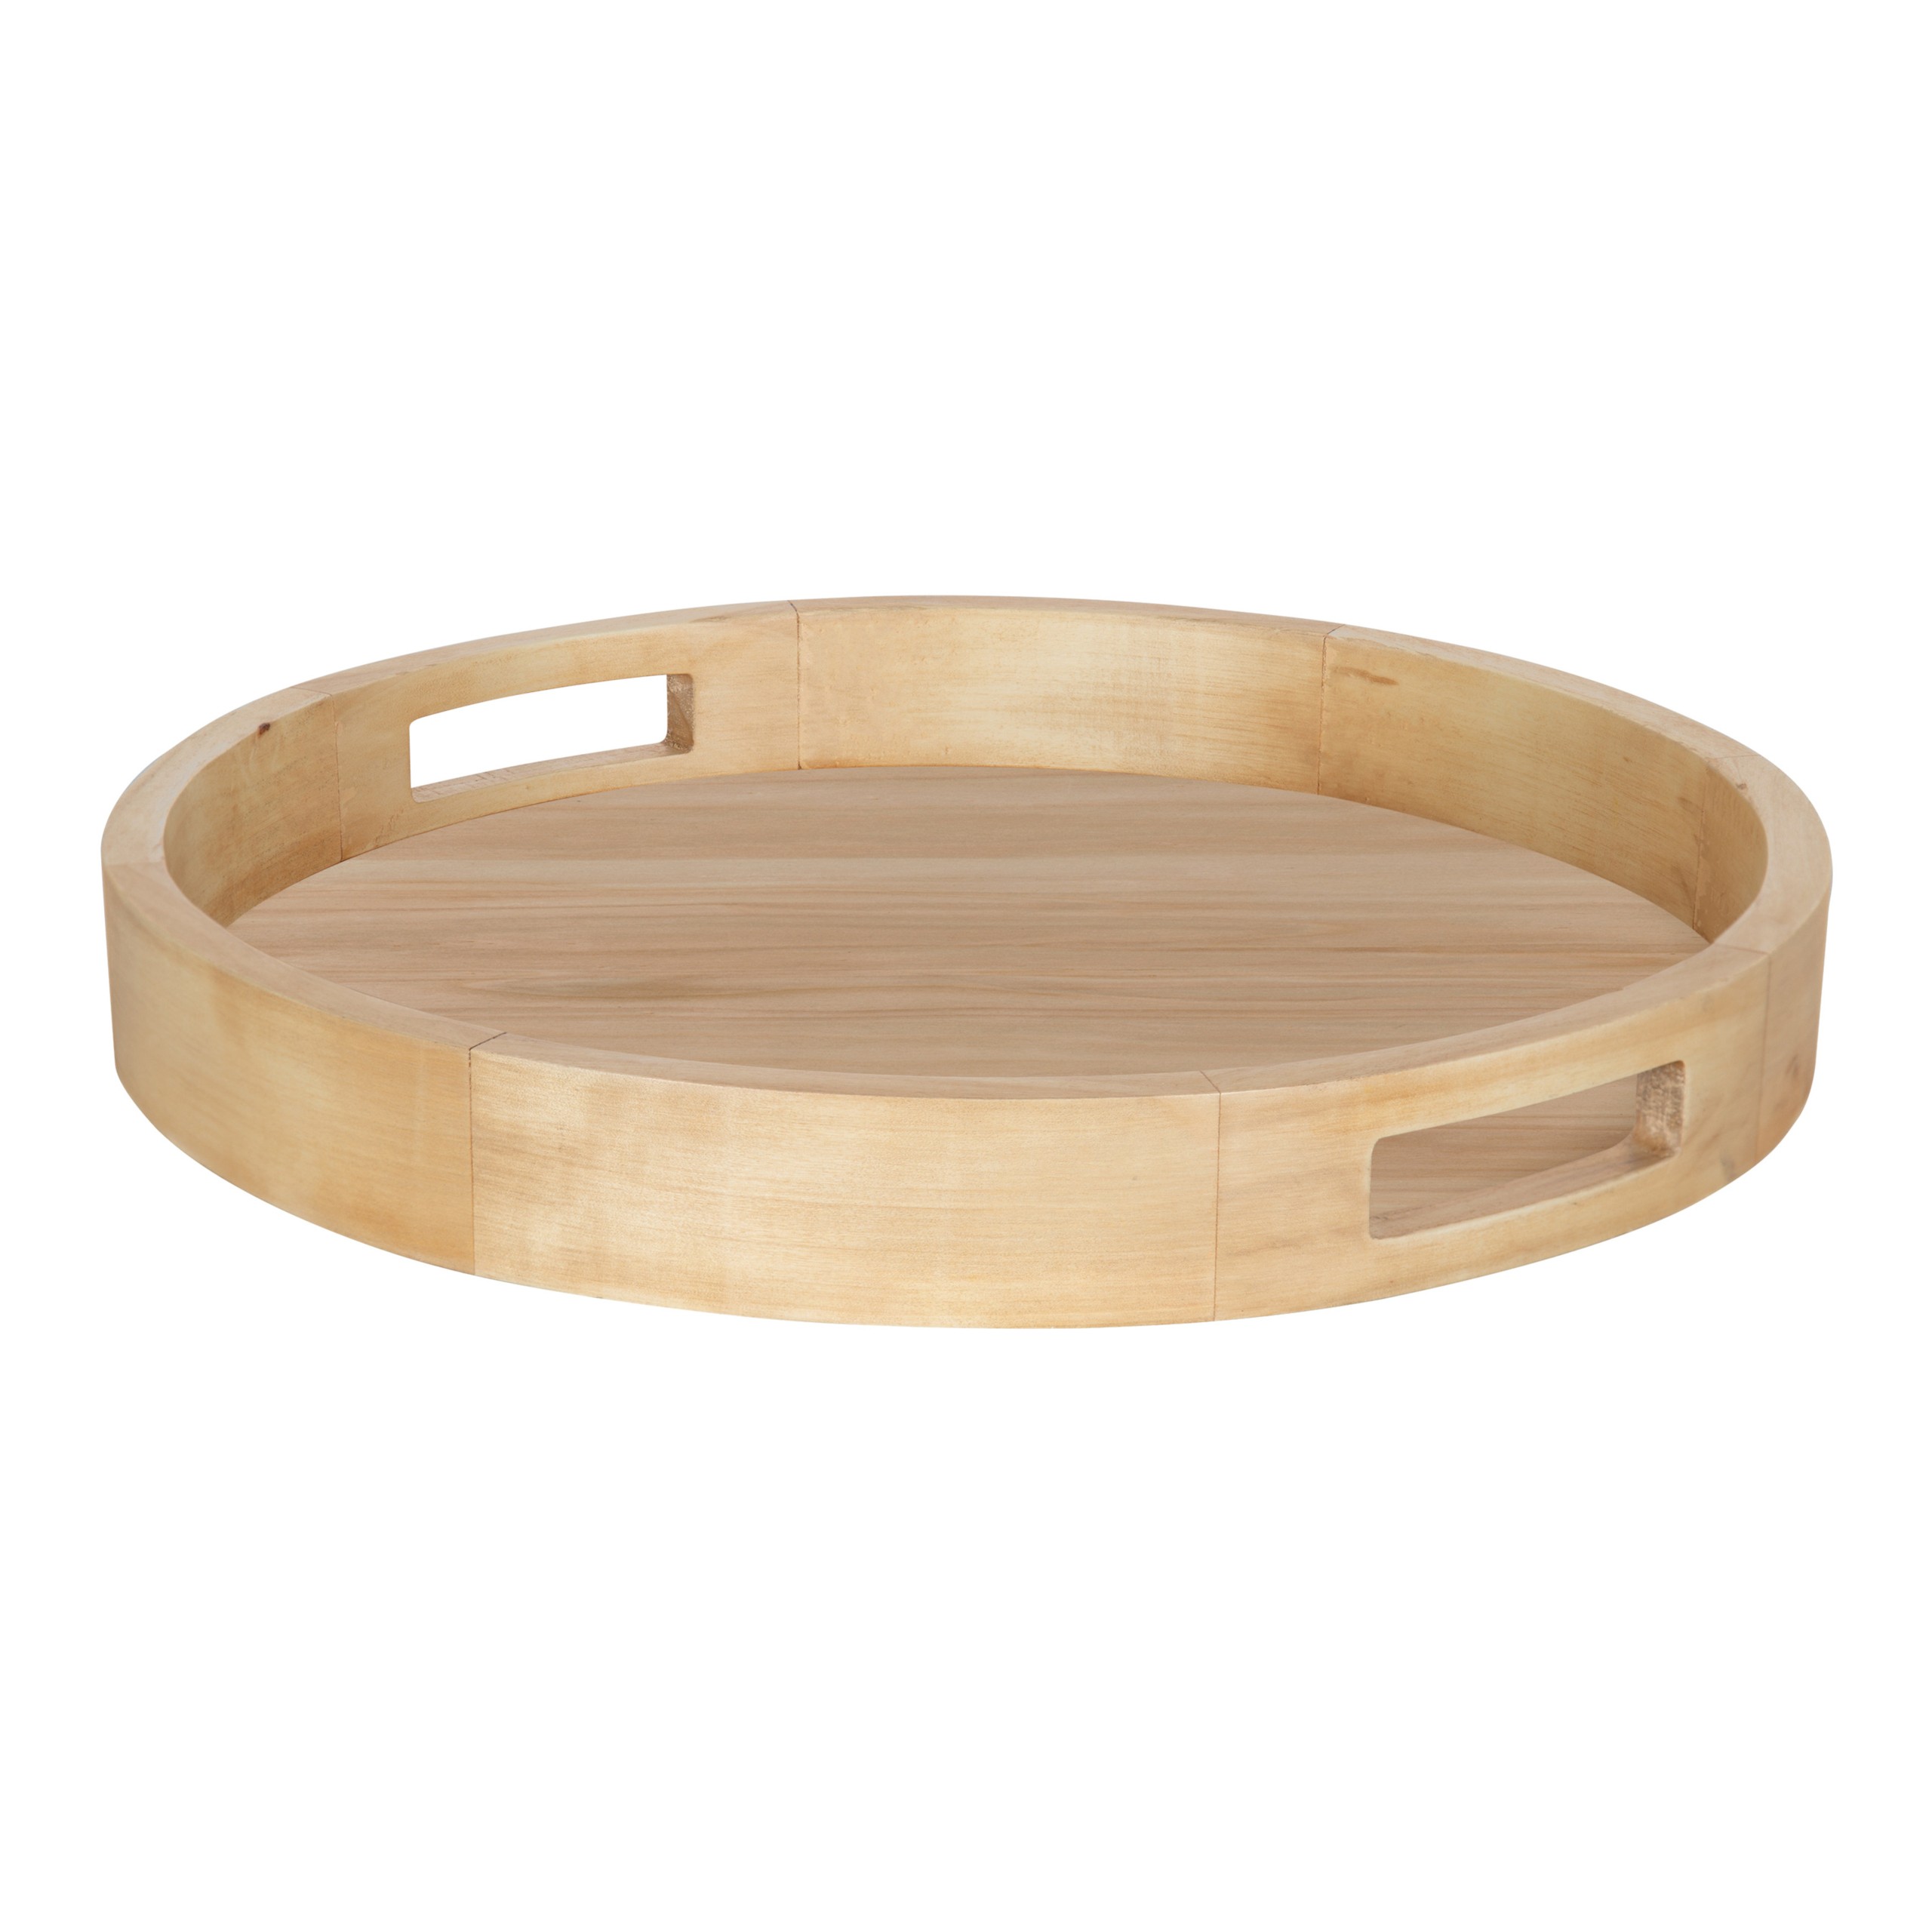 Kate and laurel hutton large round wood tray with handles